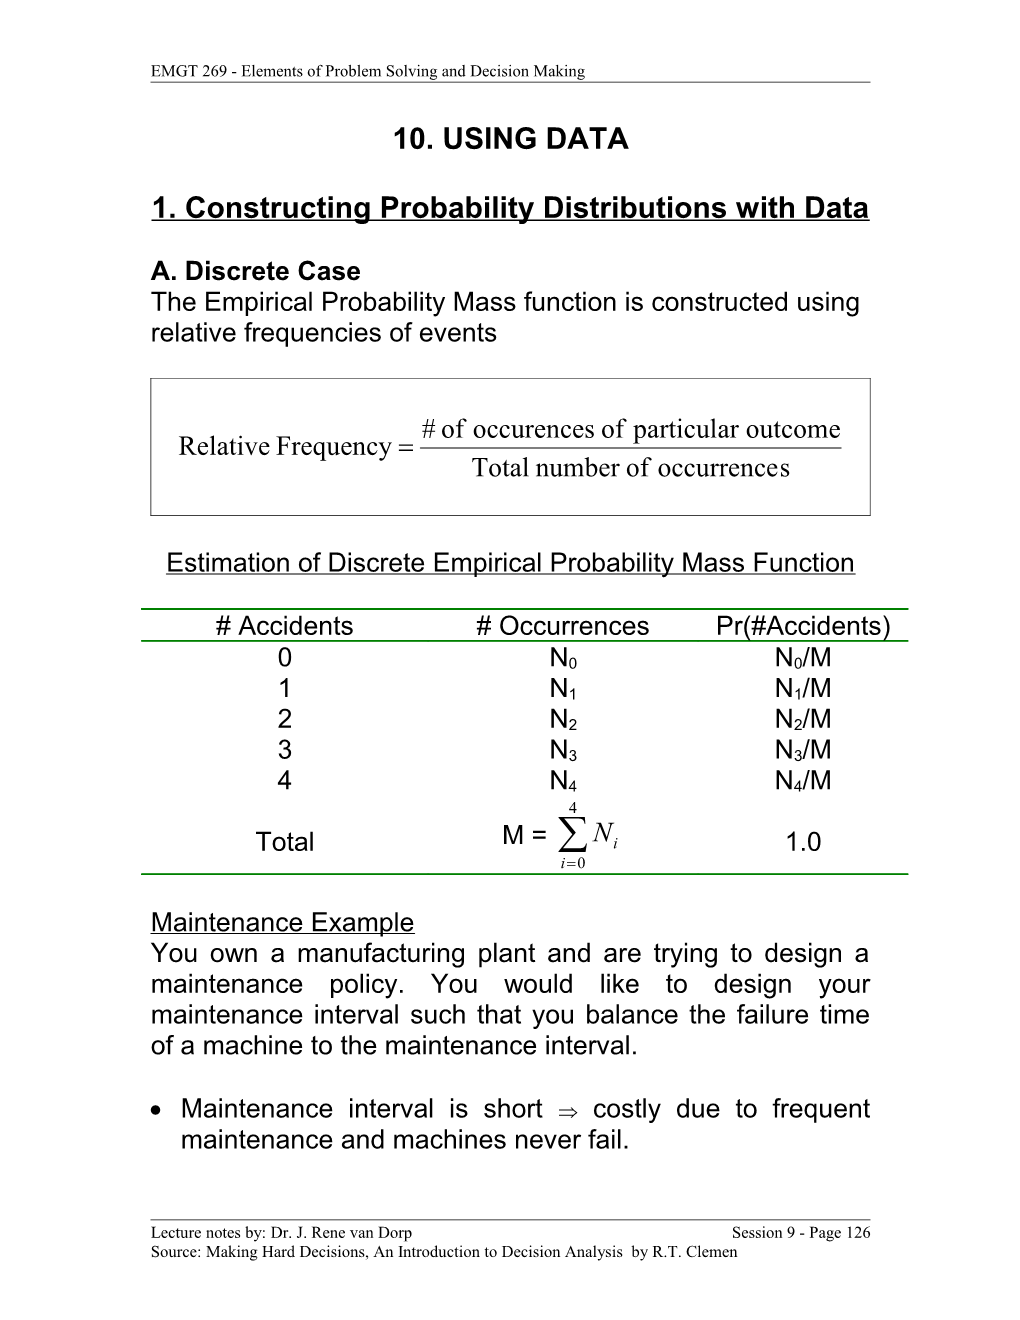 1. Constructing Probability Distributions with Data